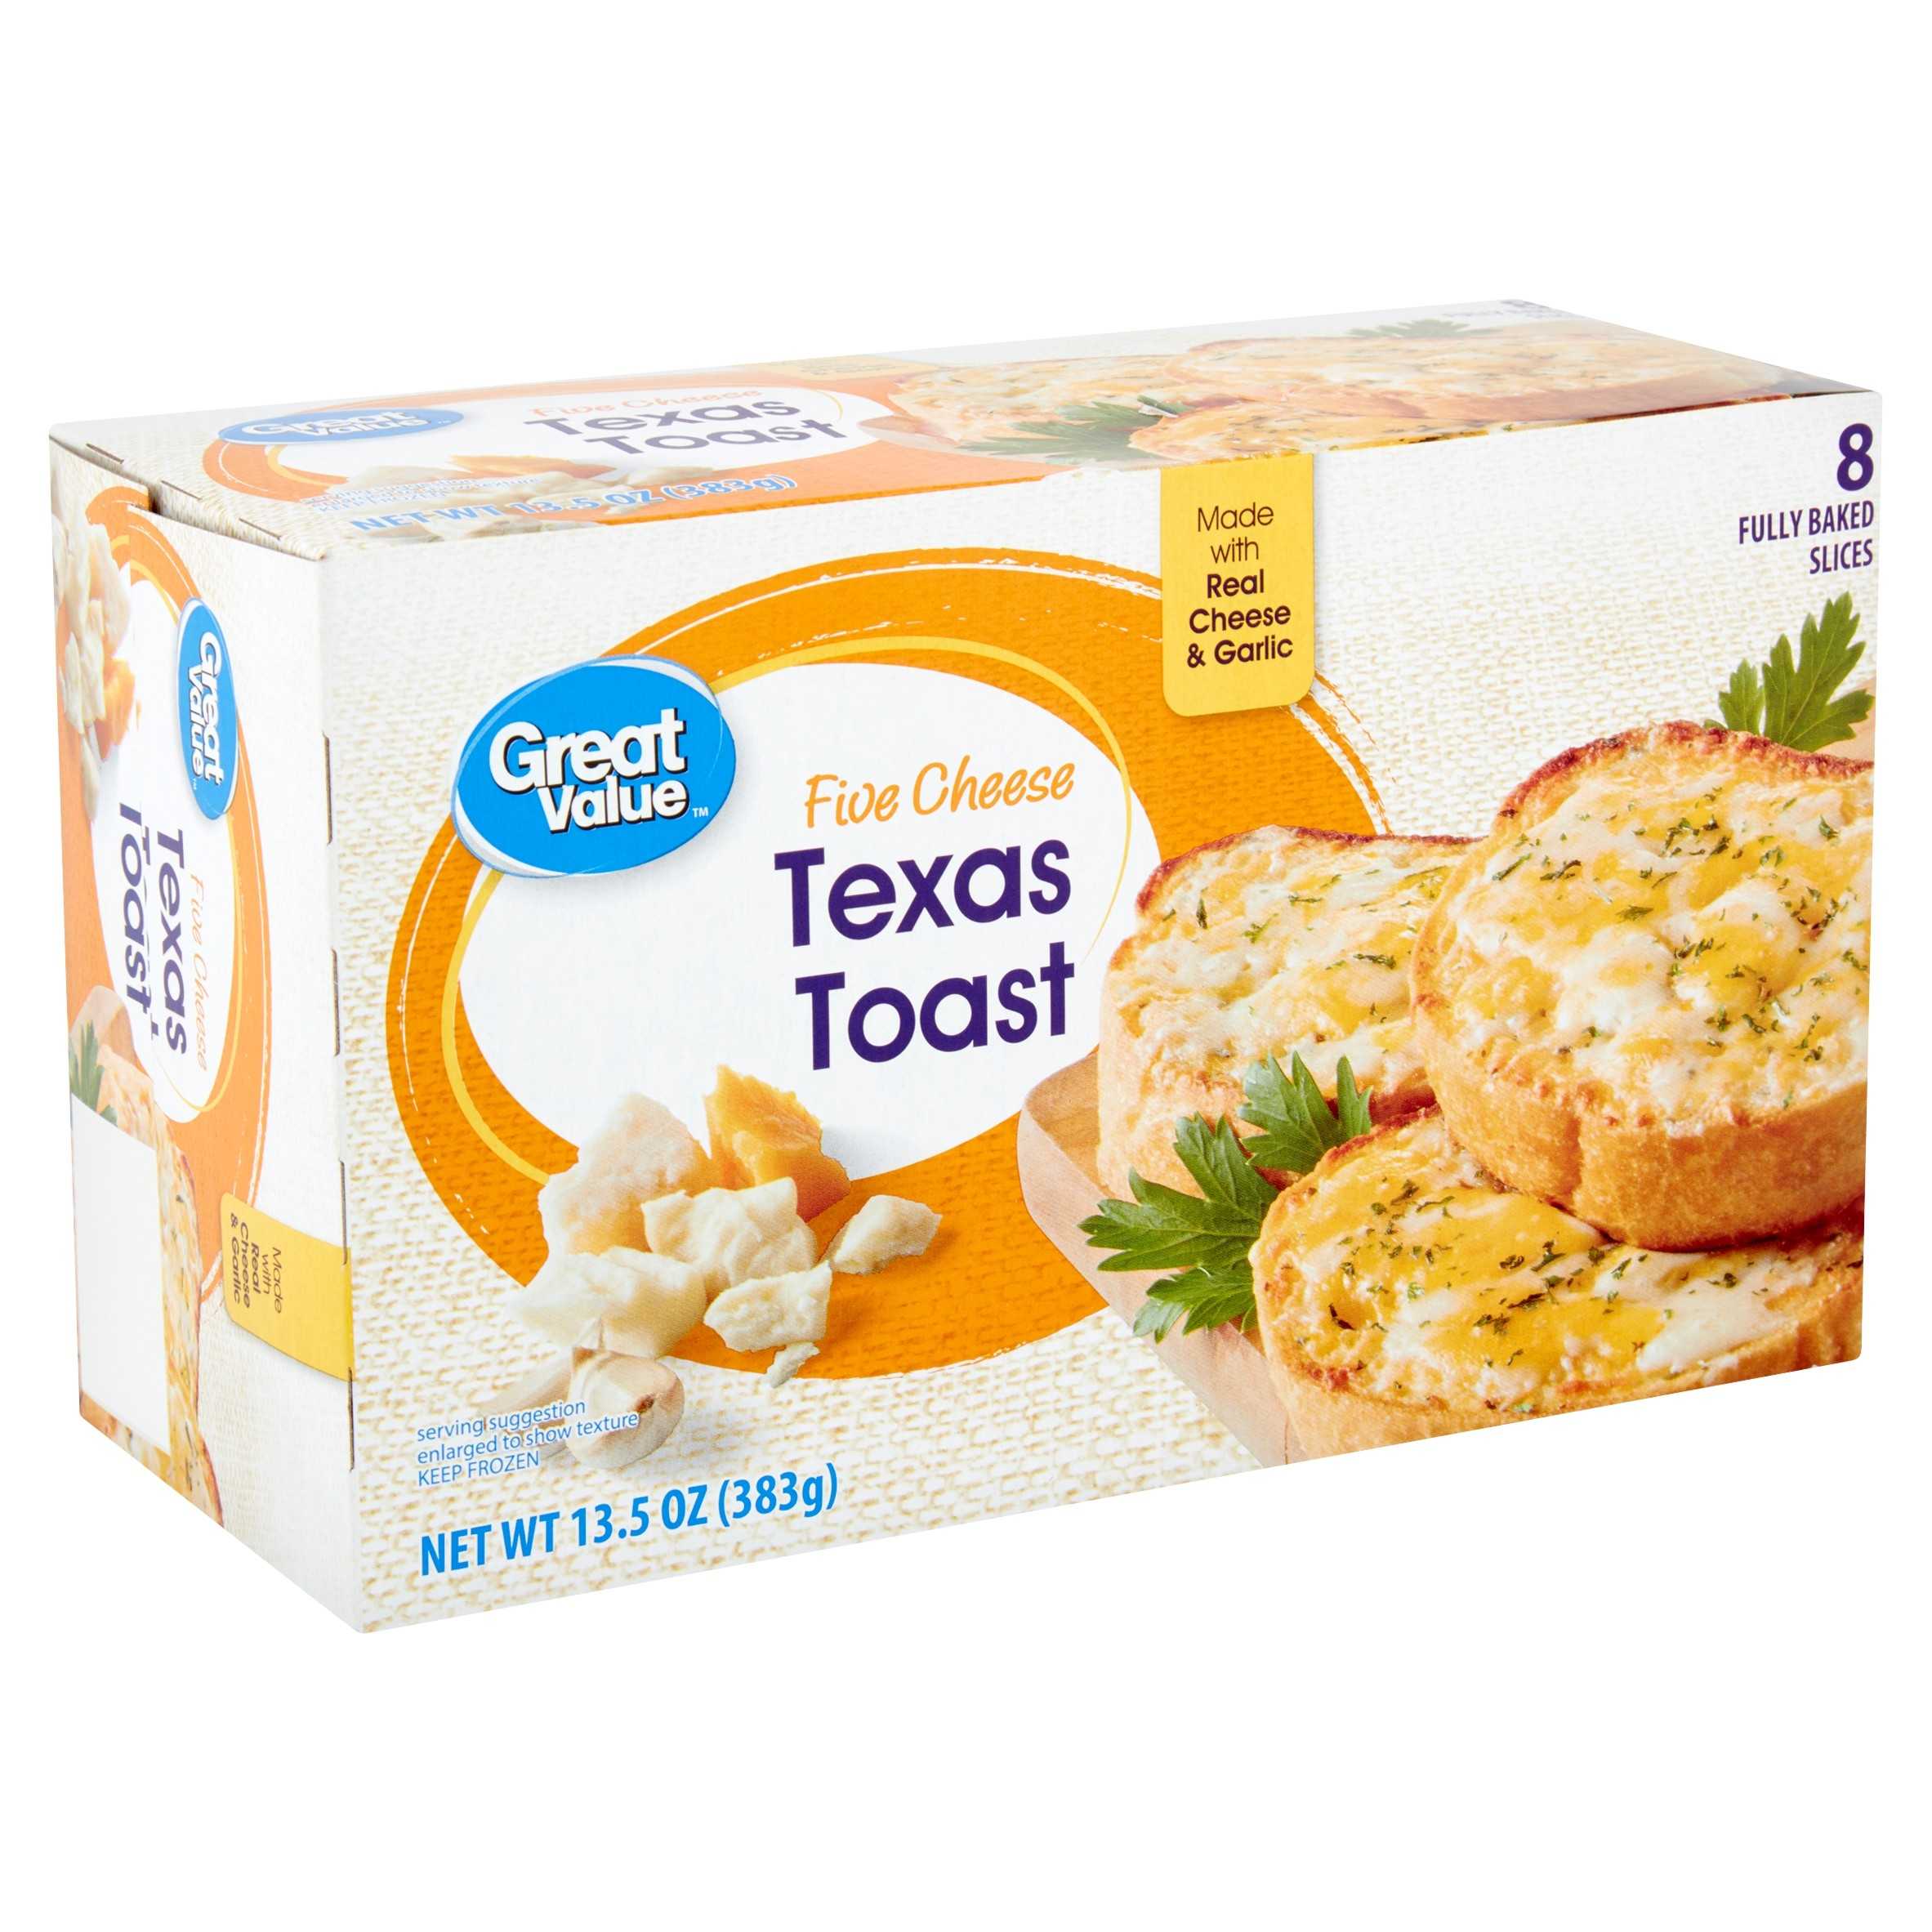 Great Value Five Cheese Texas Toast, 8 count, 13.5 oz